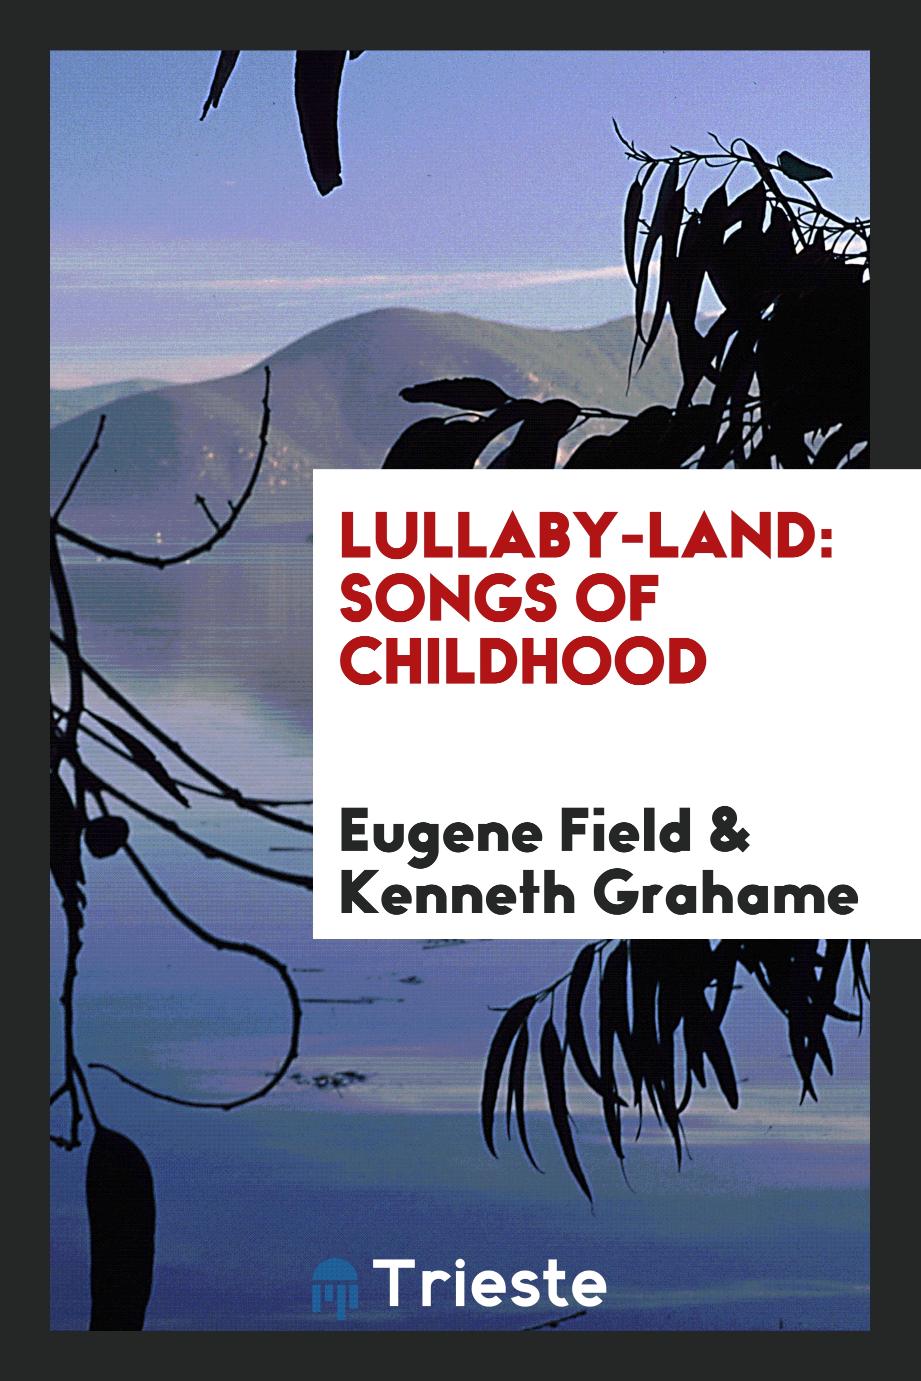 Lullaby-land: songs of childhood